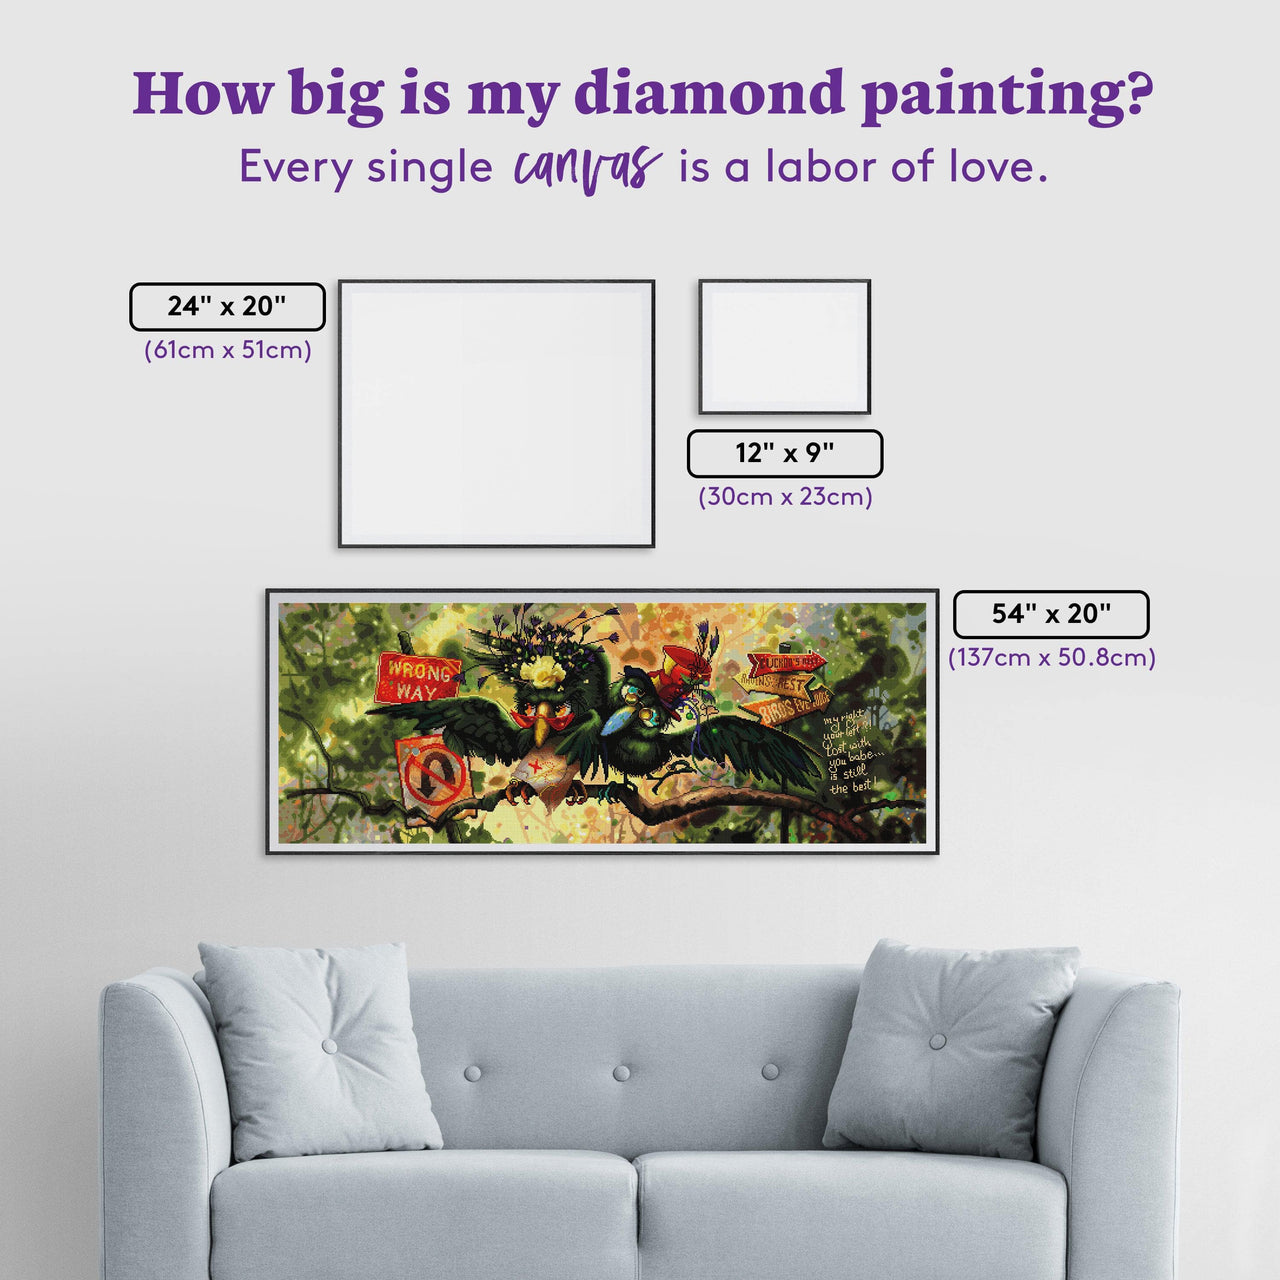 Diamond Painting Lost With You 54" x 20" (137cm x 50.8cm) / Square With 67 Colors Including 4 ABs and 1 Fairy Dust Diamonds / 112,200